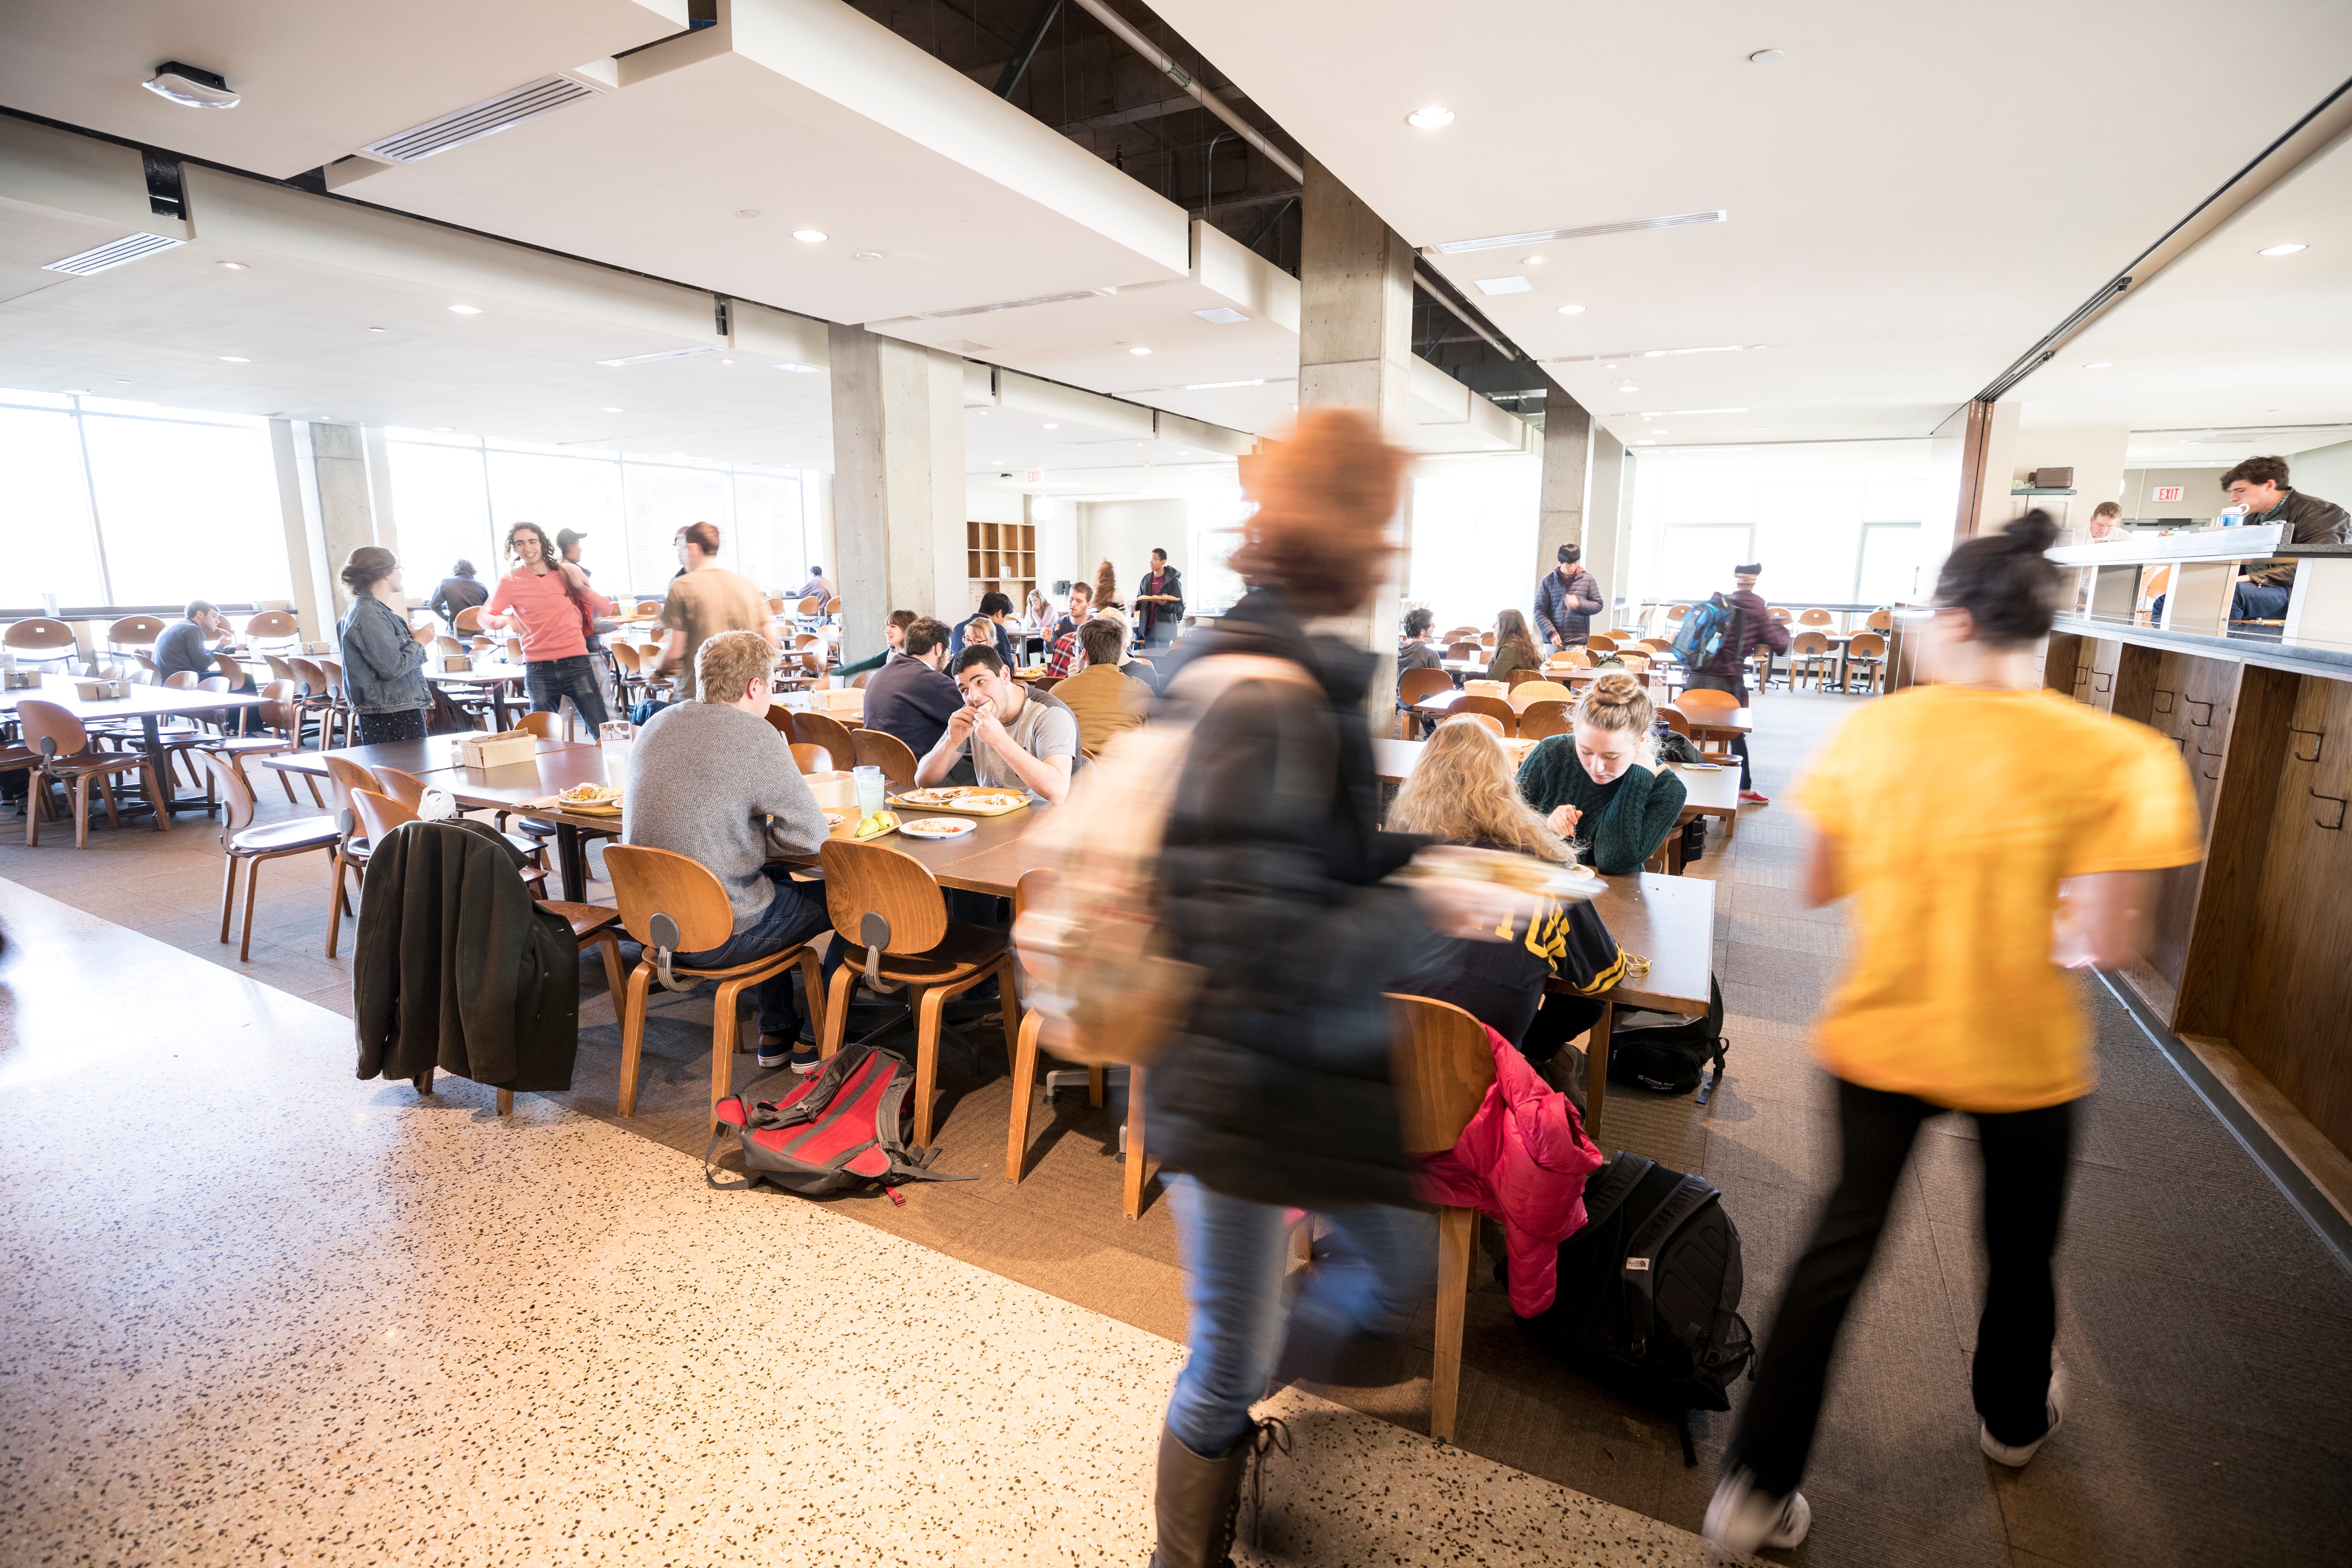 Students eat in a busy dining hall